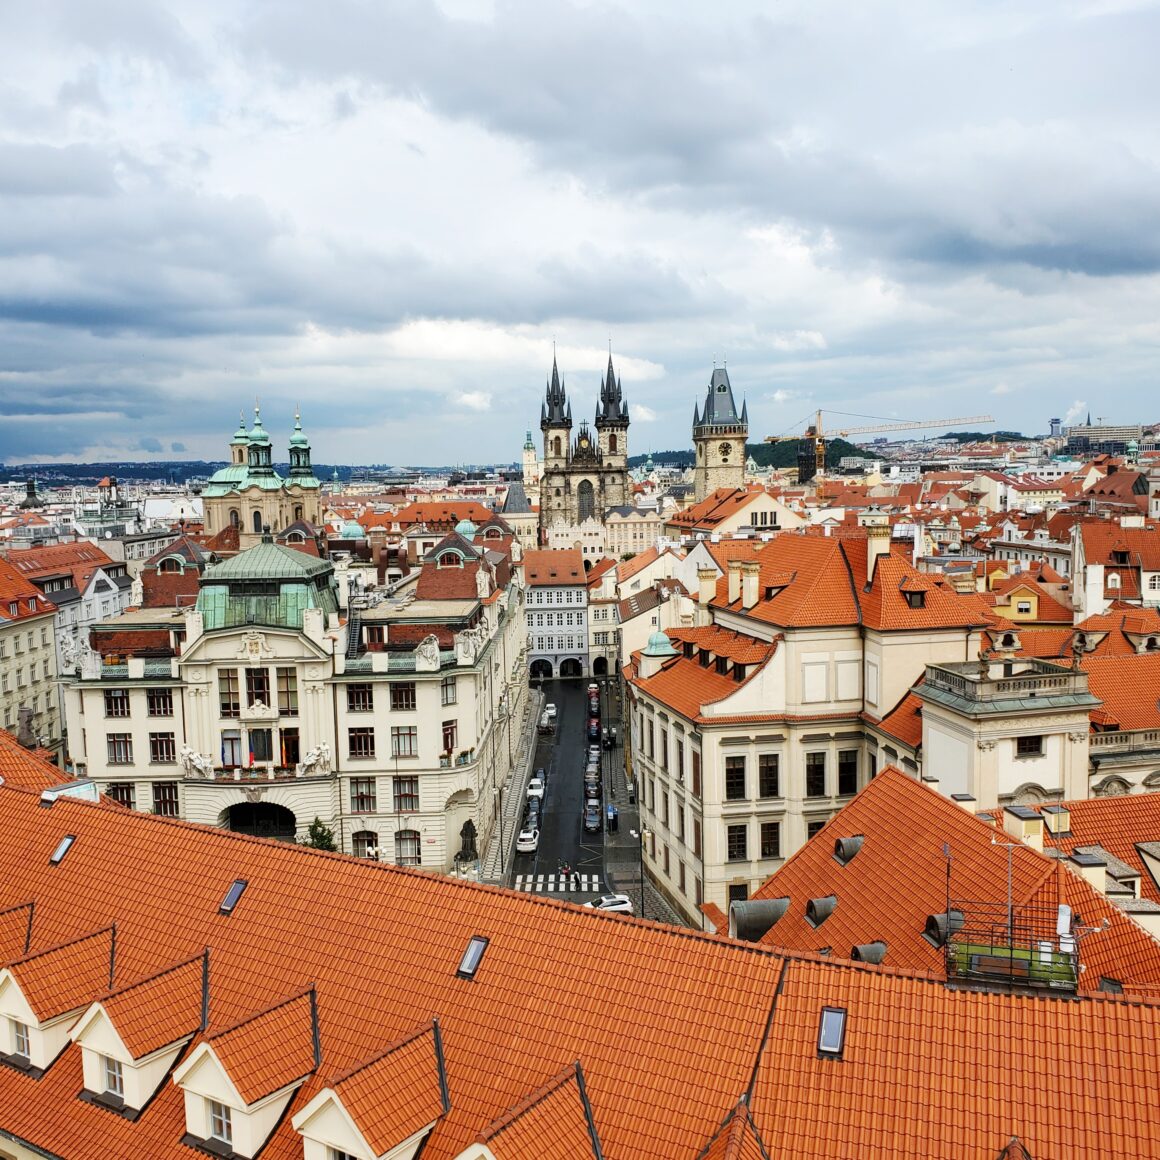 A photo of Prague's Old Town Square from Klementinum